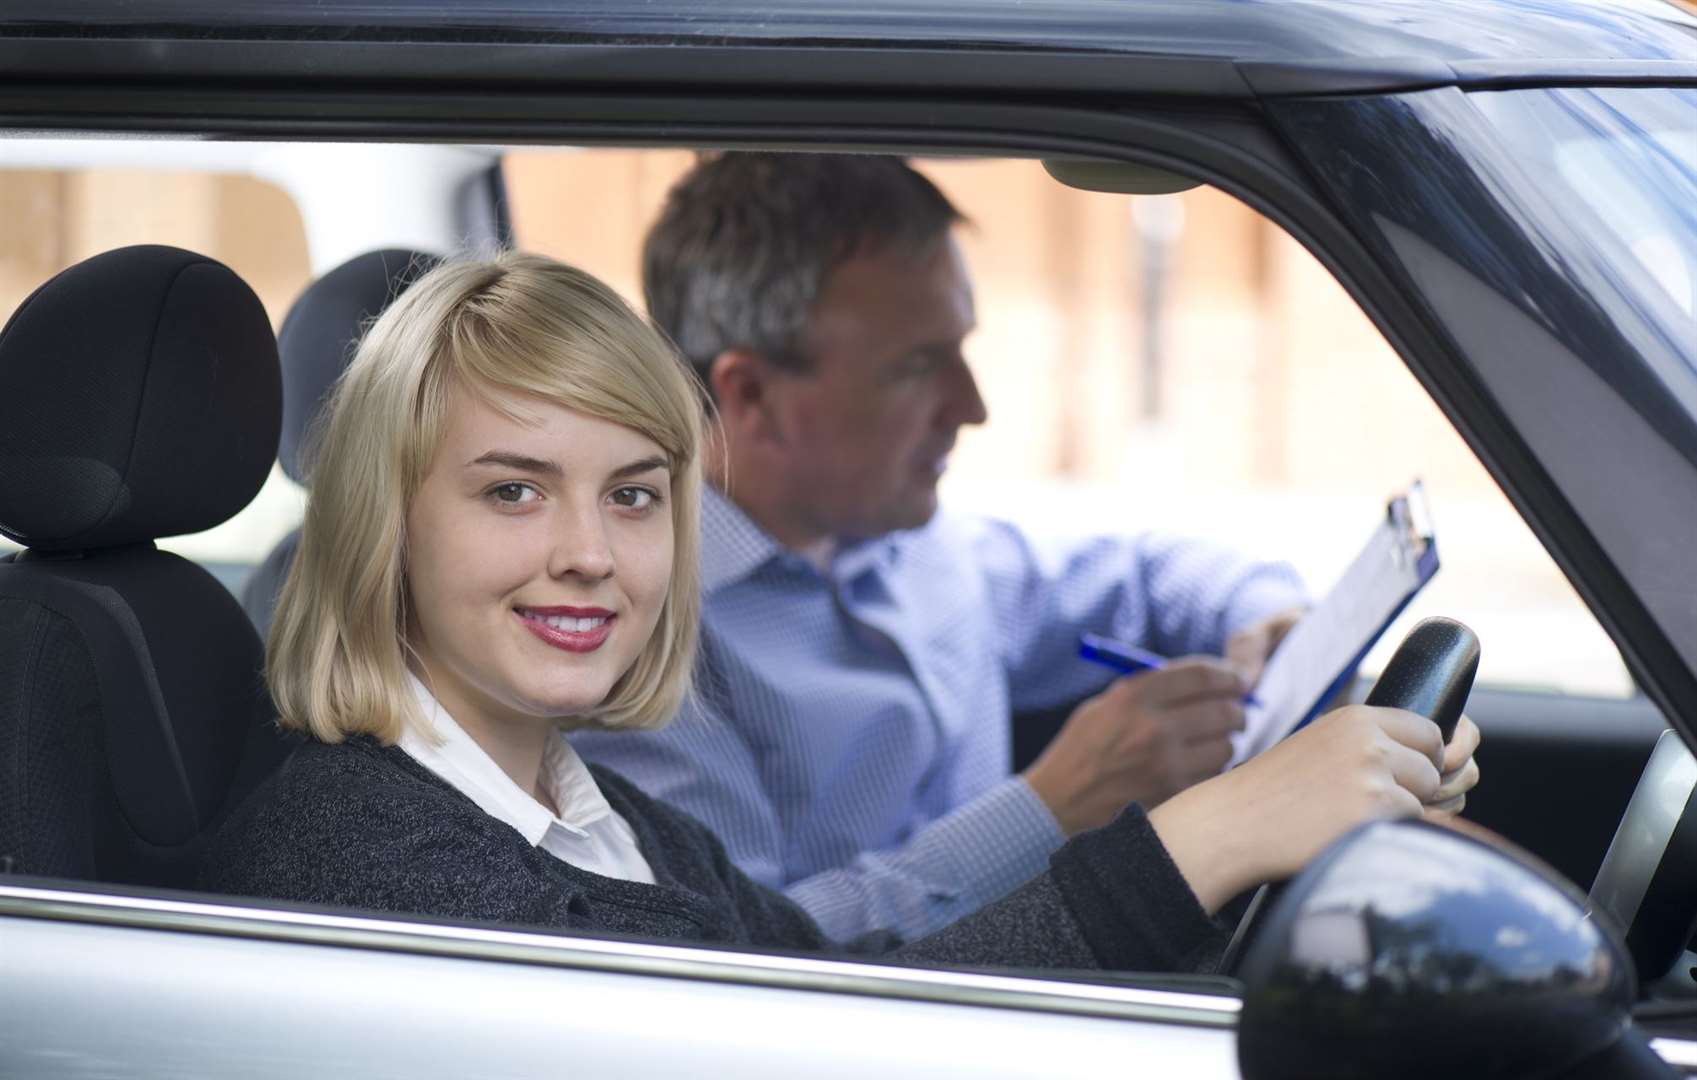 You can tell this is a posed stock image – does anyone look this relaxed on a driving test?